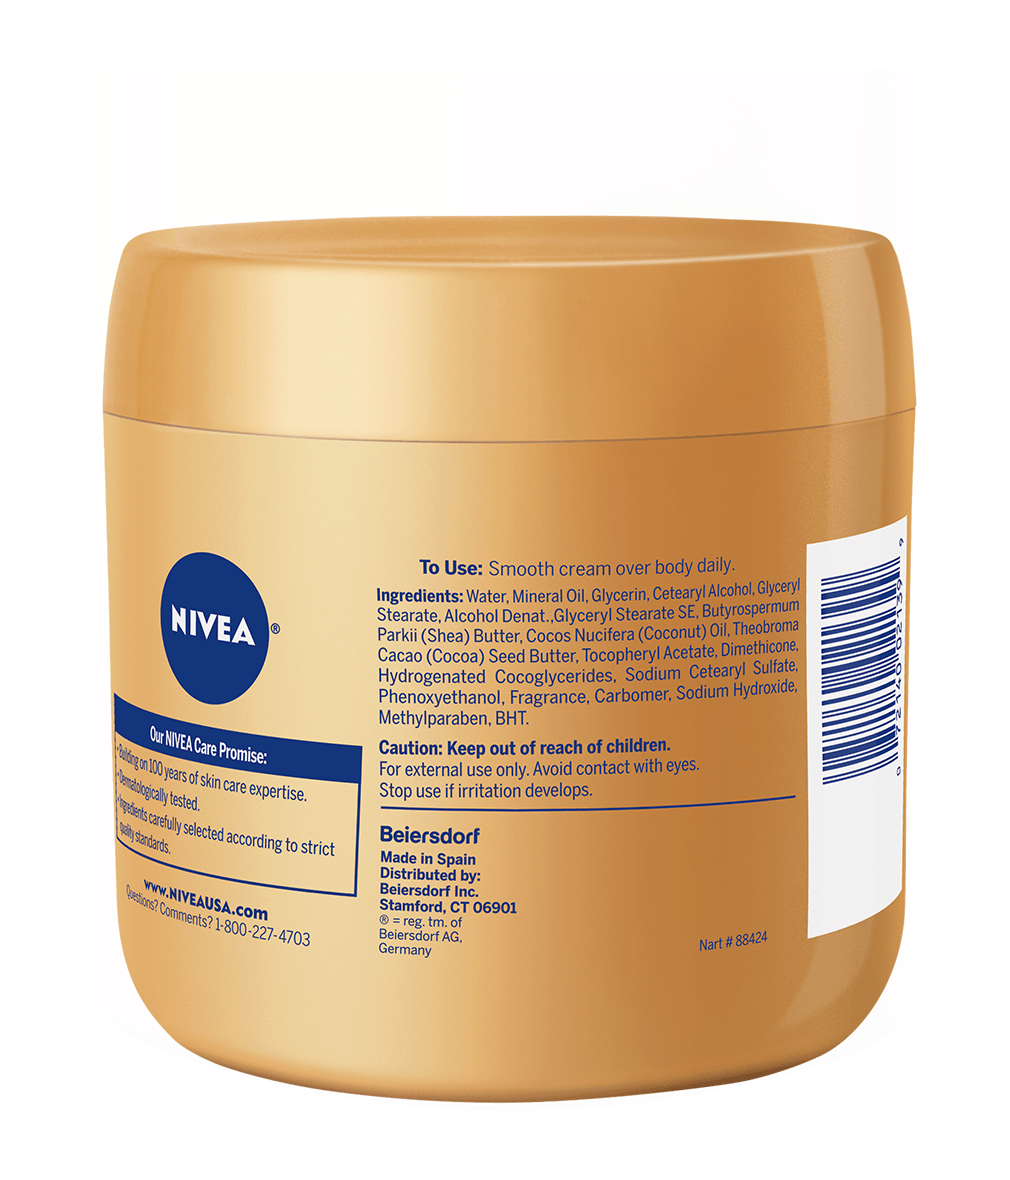 Cocoa Butter Body Cream deeply moisturizes for 48HR